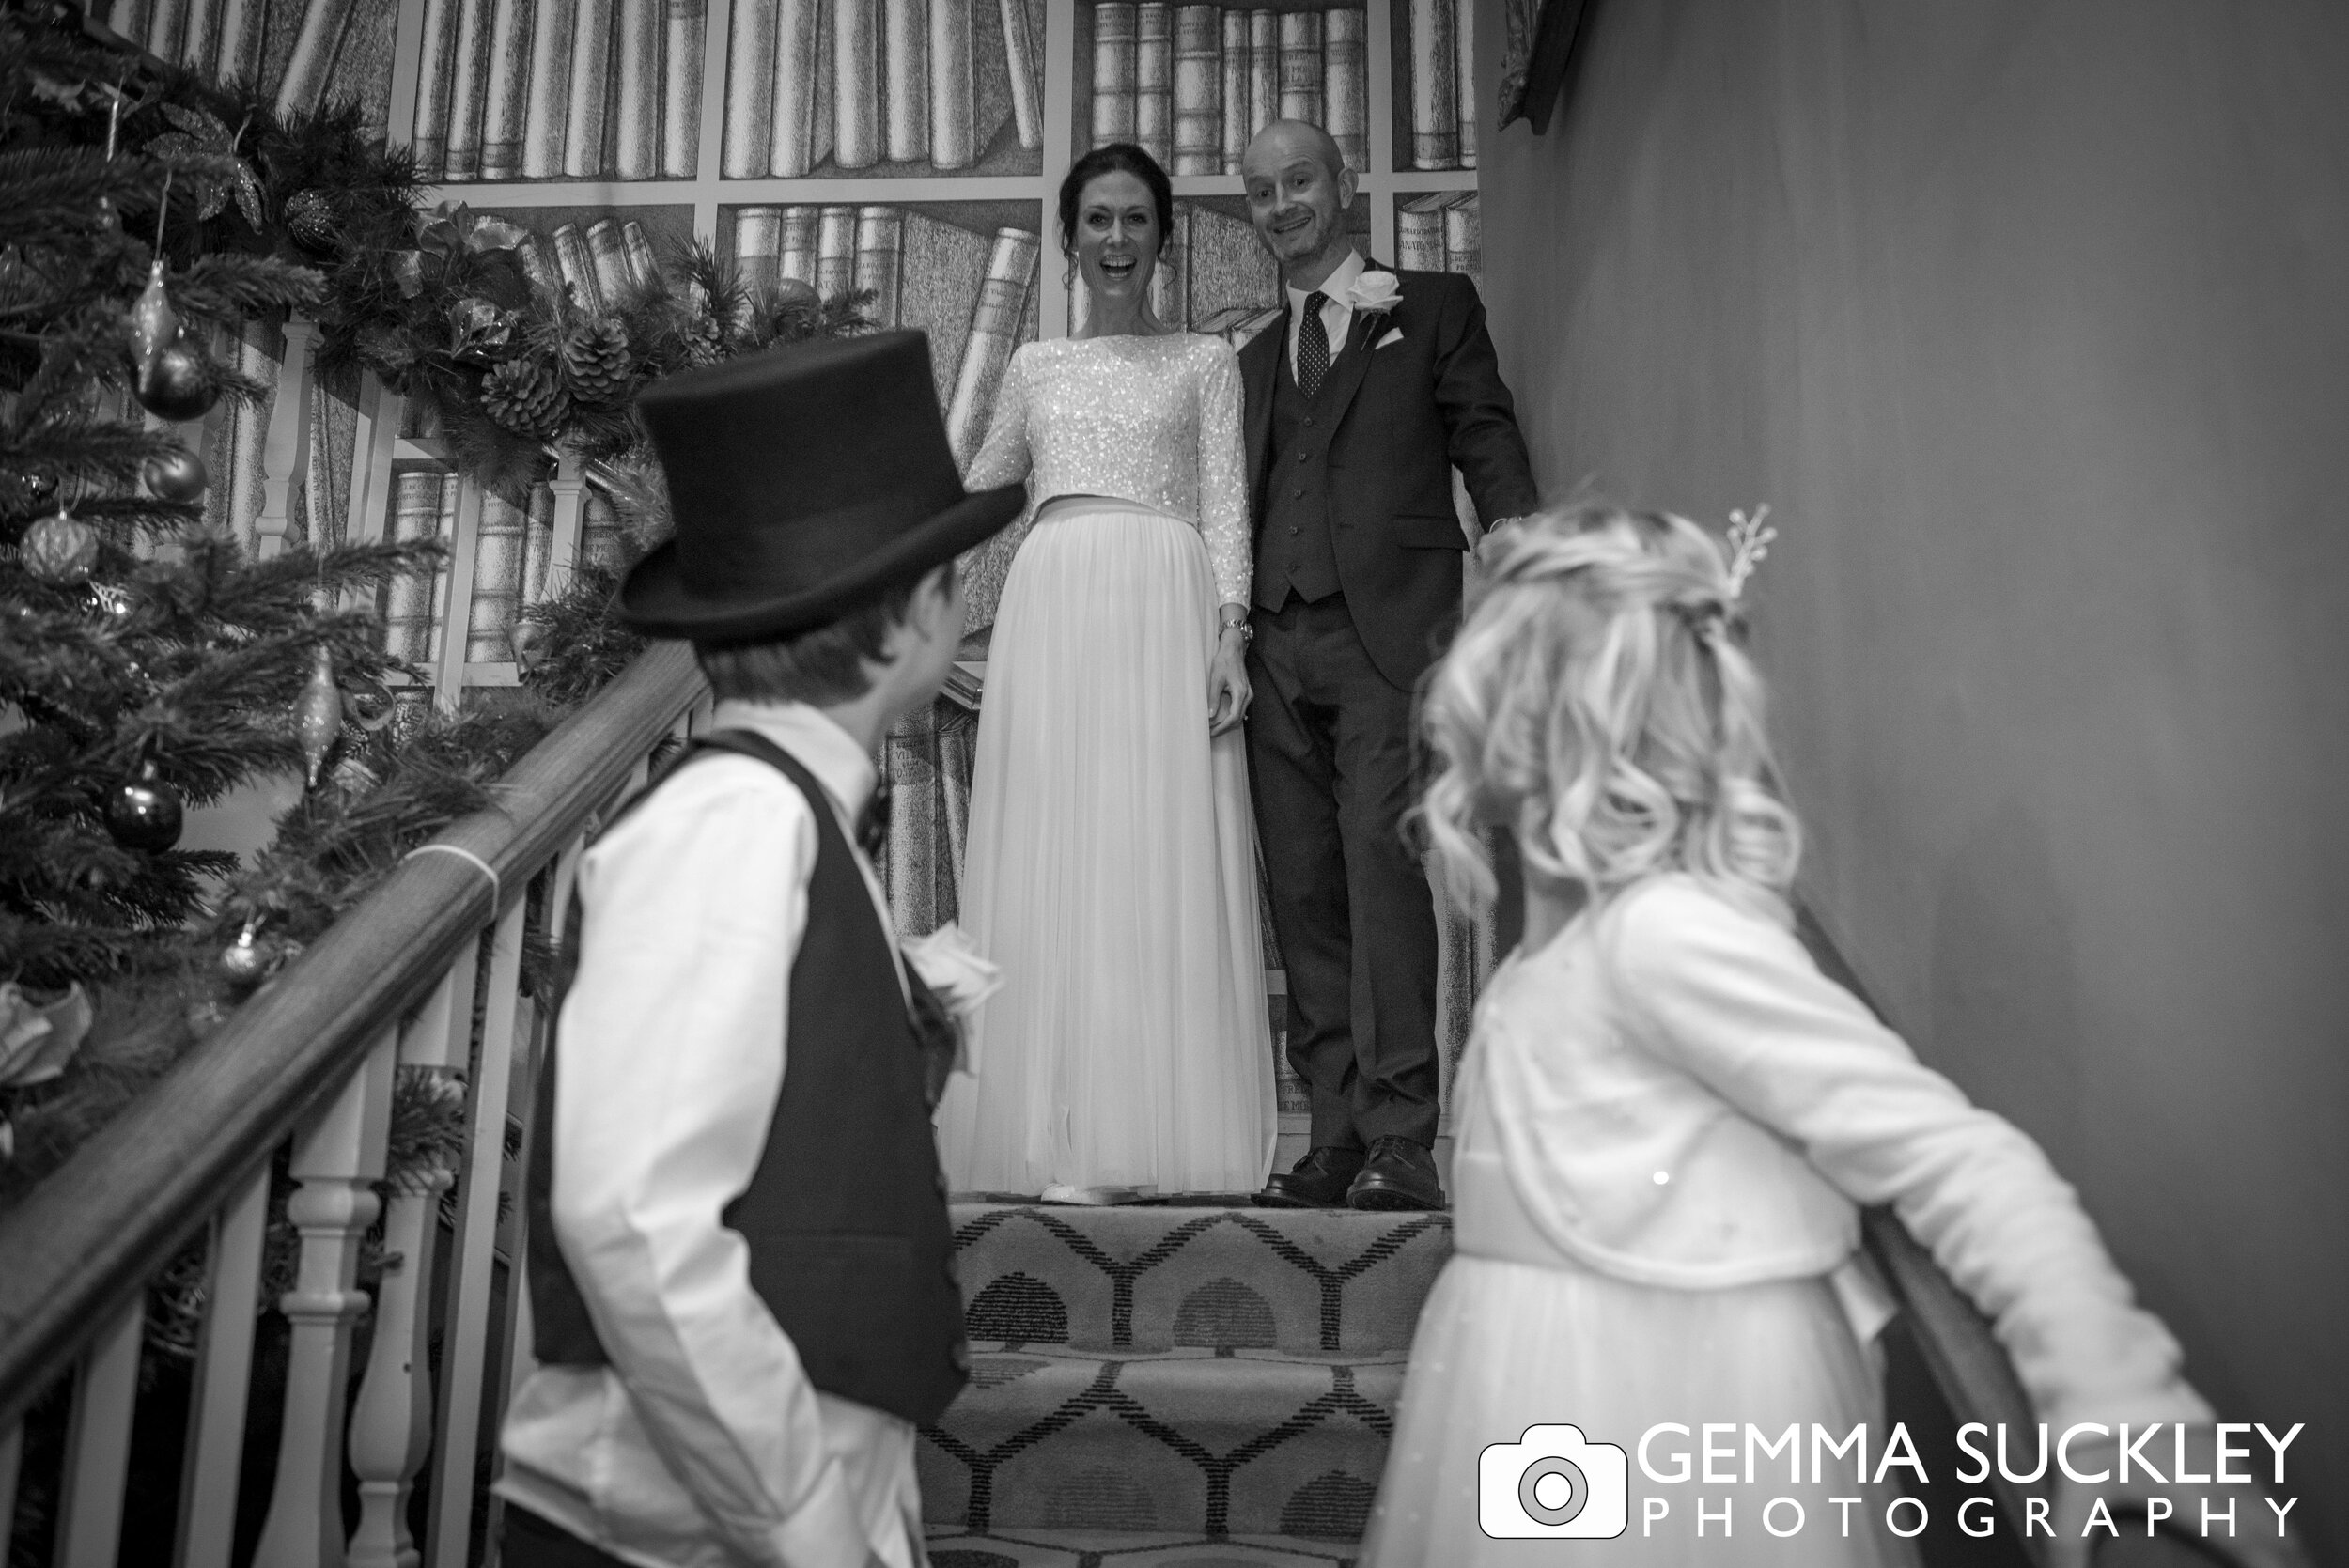 the bride and groom's family wedding photograph